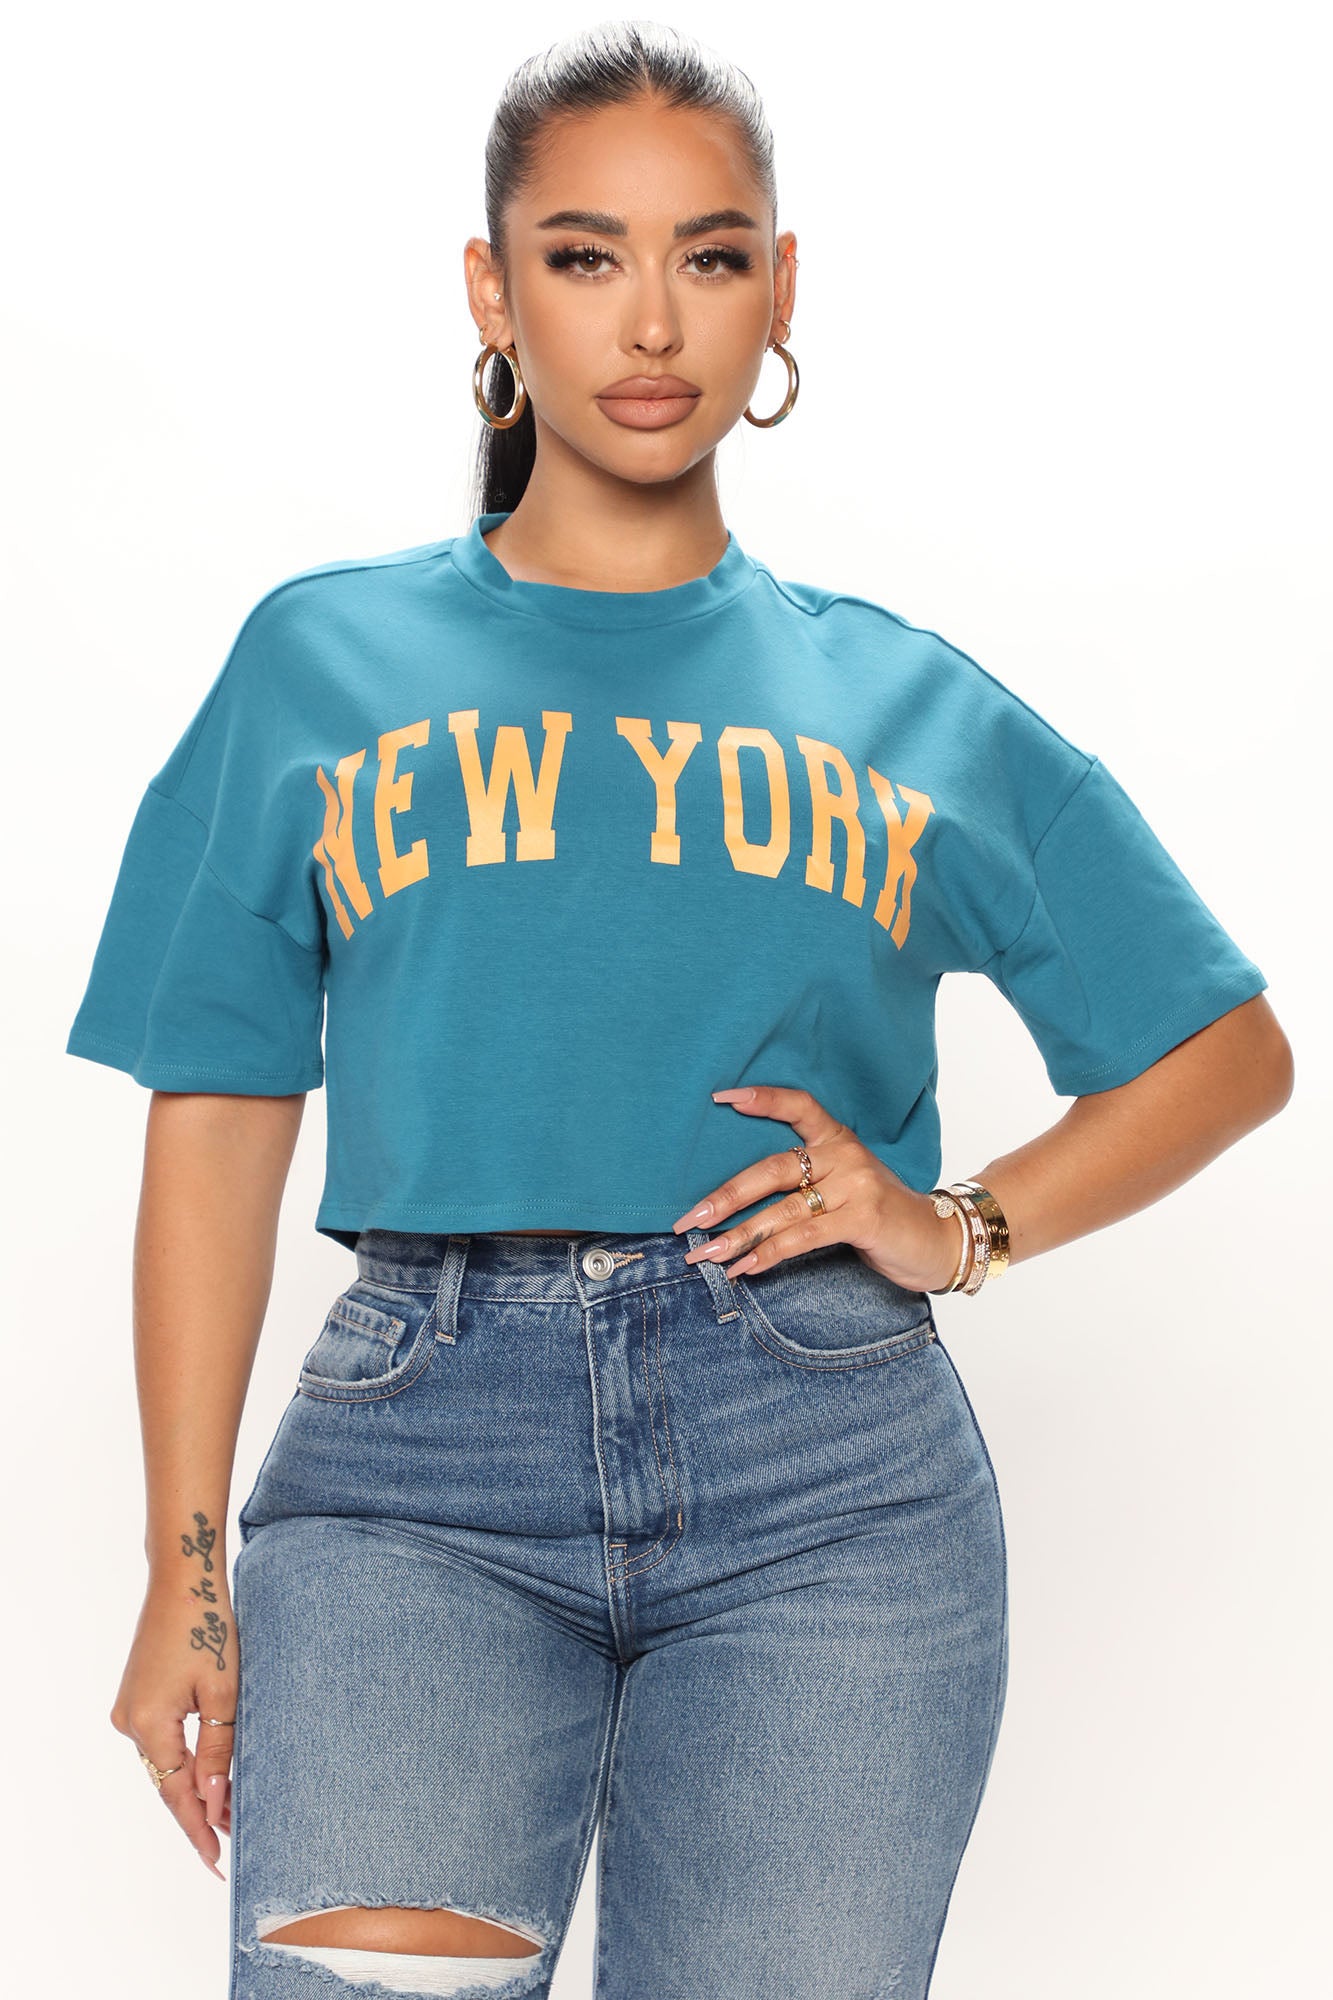 New York Cropped Tee - Teal, Fashion Nova, Screens Tops and Bottoms